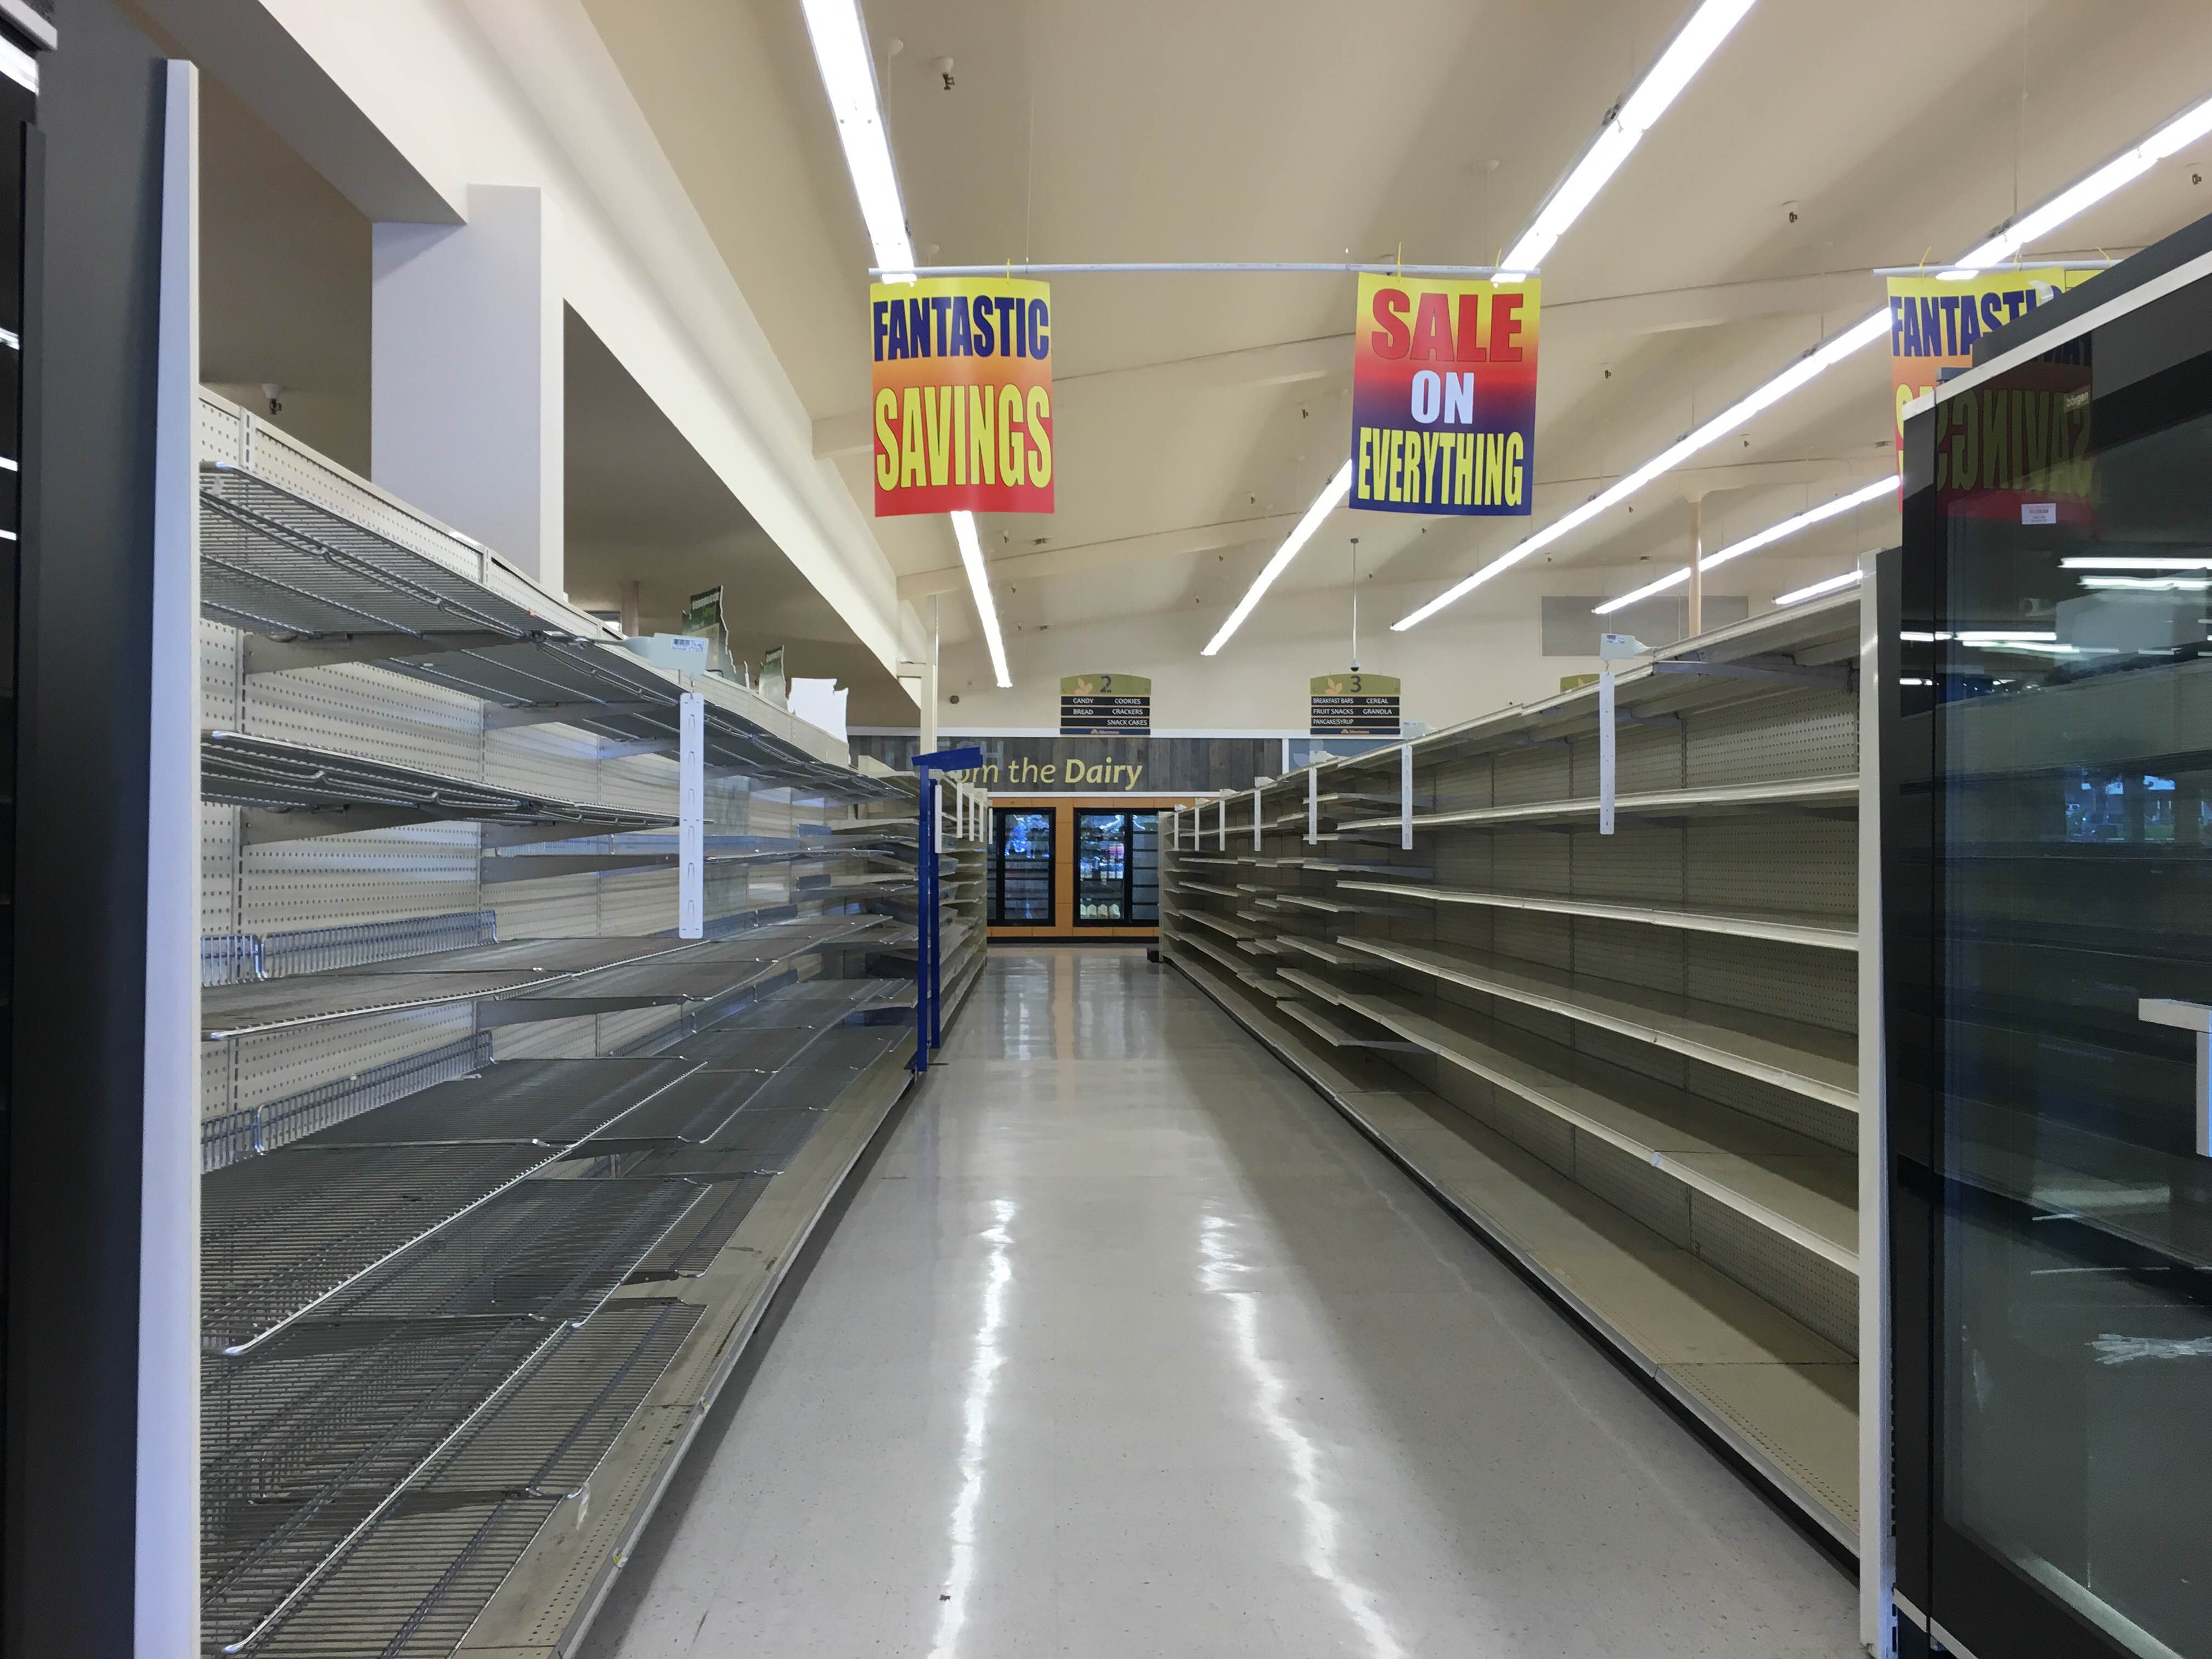 One aisle in Albertsons two days before it closed on May 7, 2016.              photo: Janae Easlon